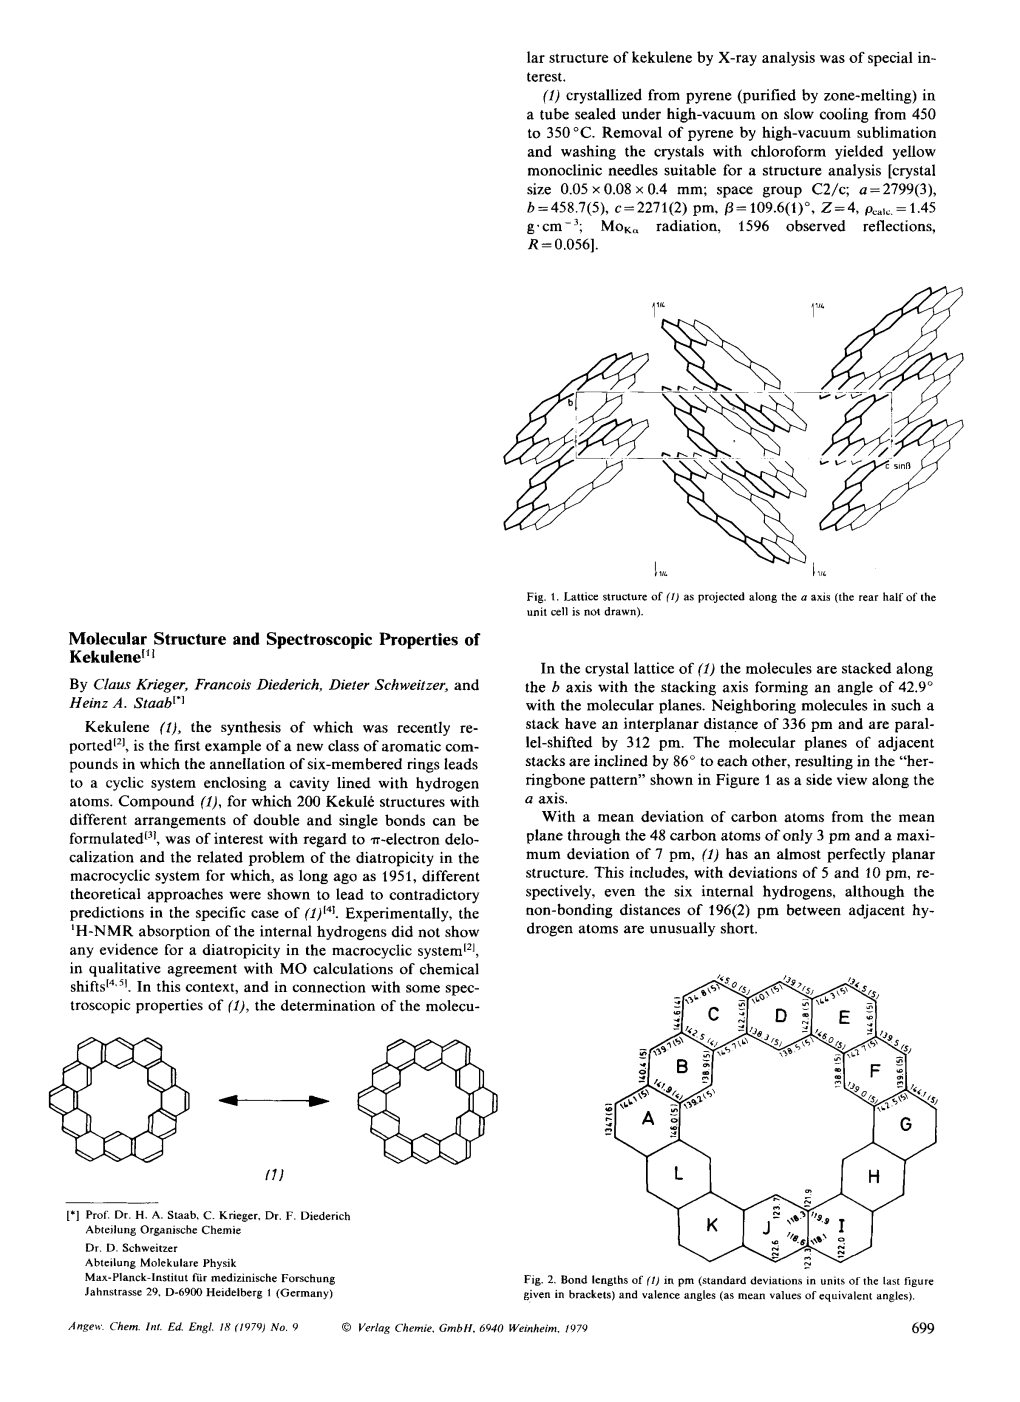 Molecular Structure and Spectroscopic Properties Of